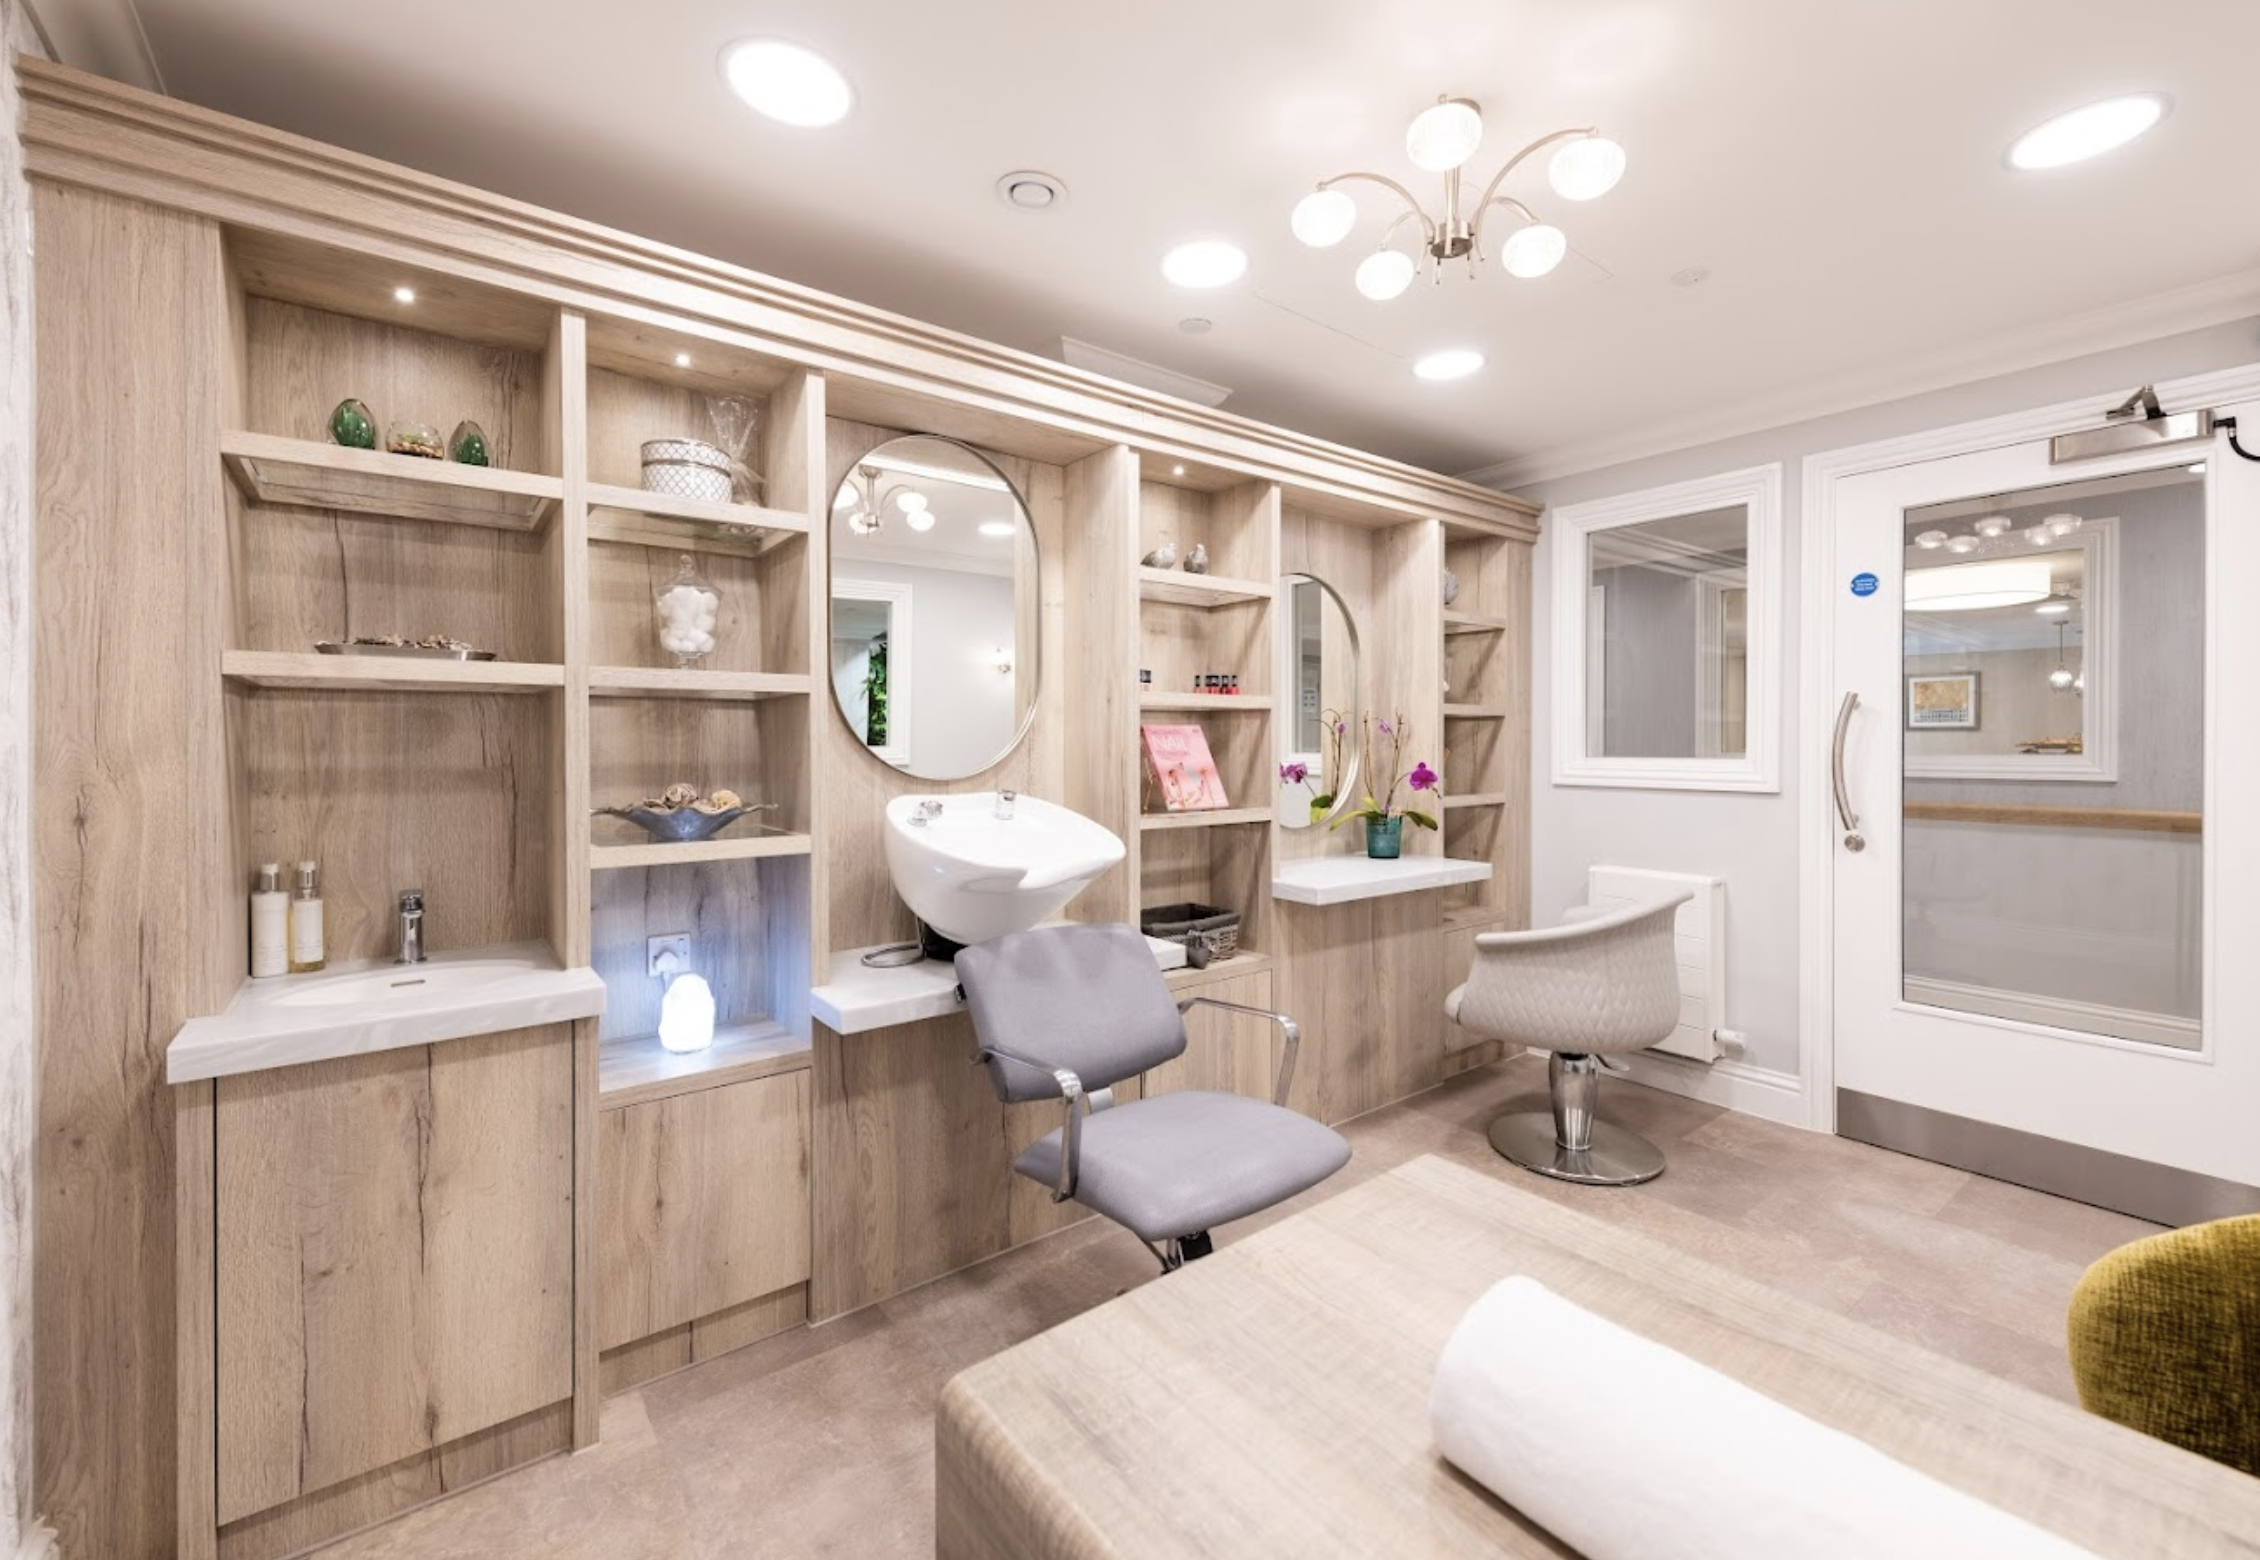 Salon of Chestnut Manor care home in Wanstead, London